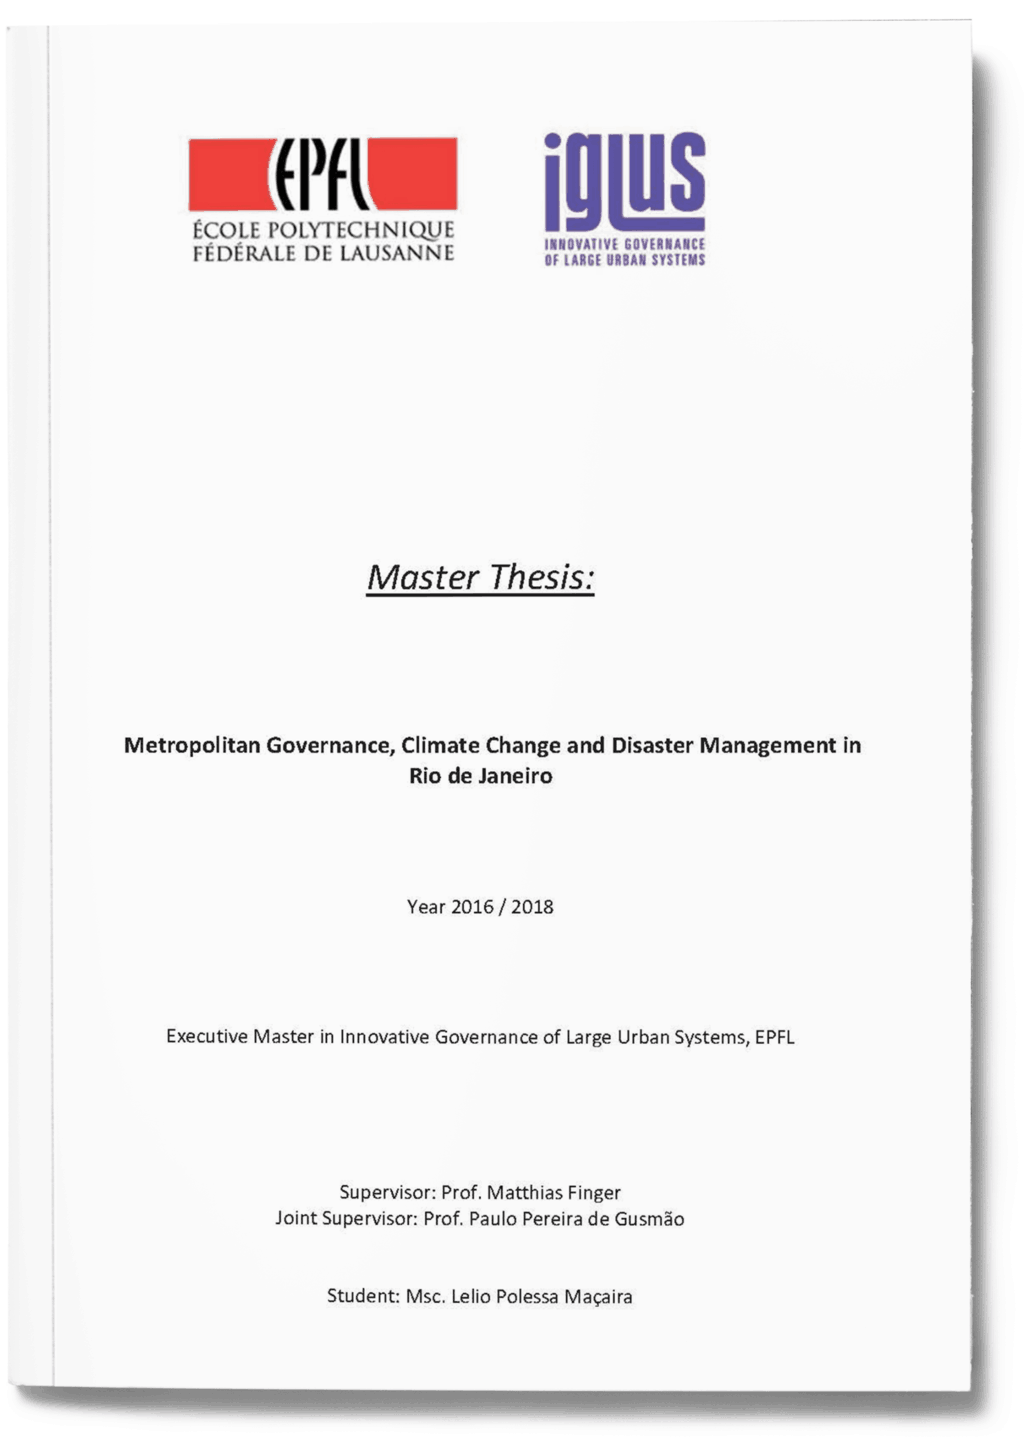 Master thesis on innovation management